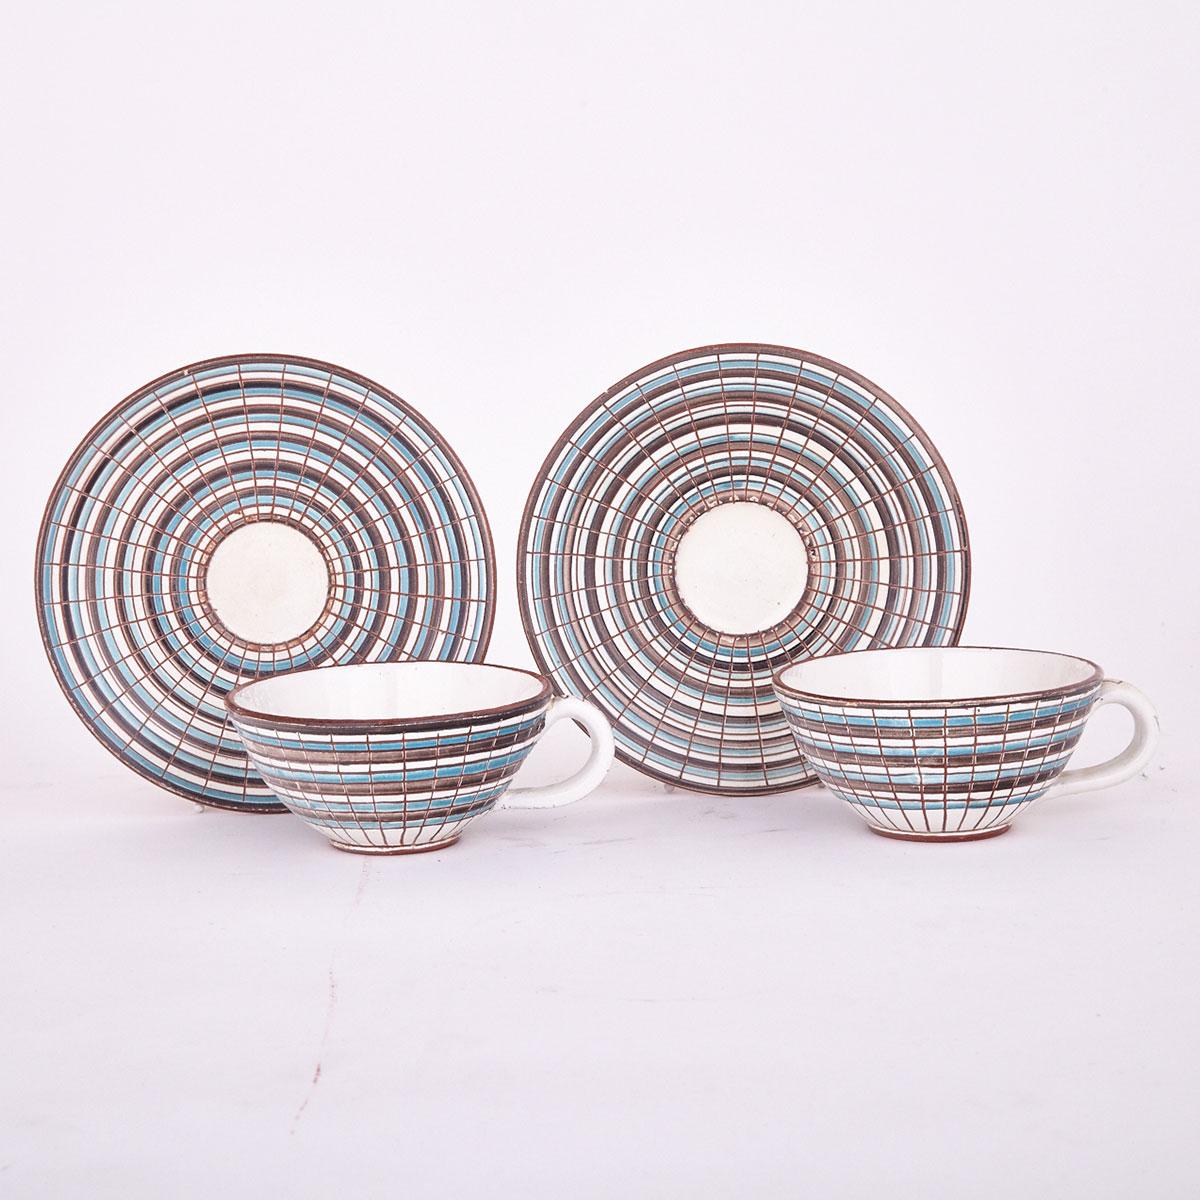 Pair of Brooklin Pottery Tea Cups and Saucers, Theo and Susan Harlander, c.1960